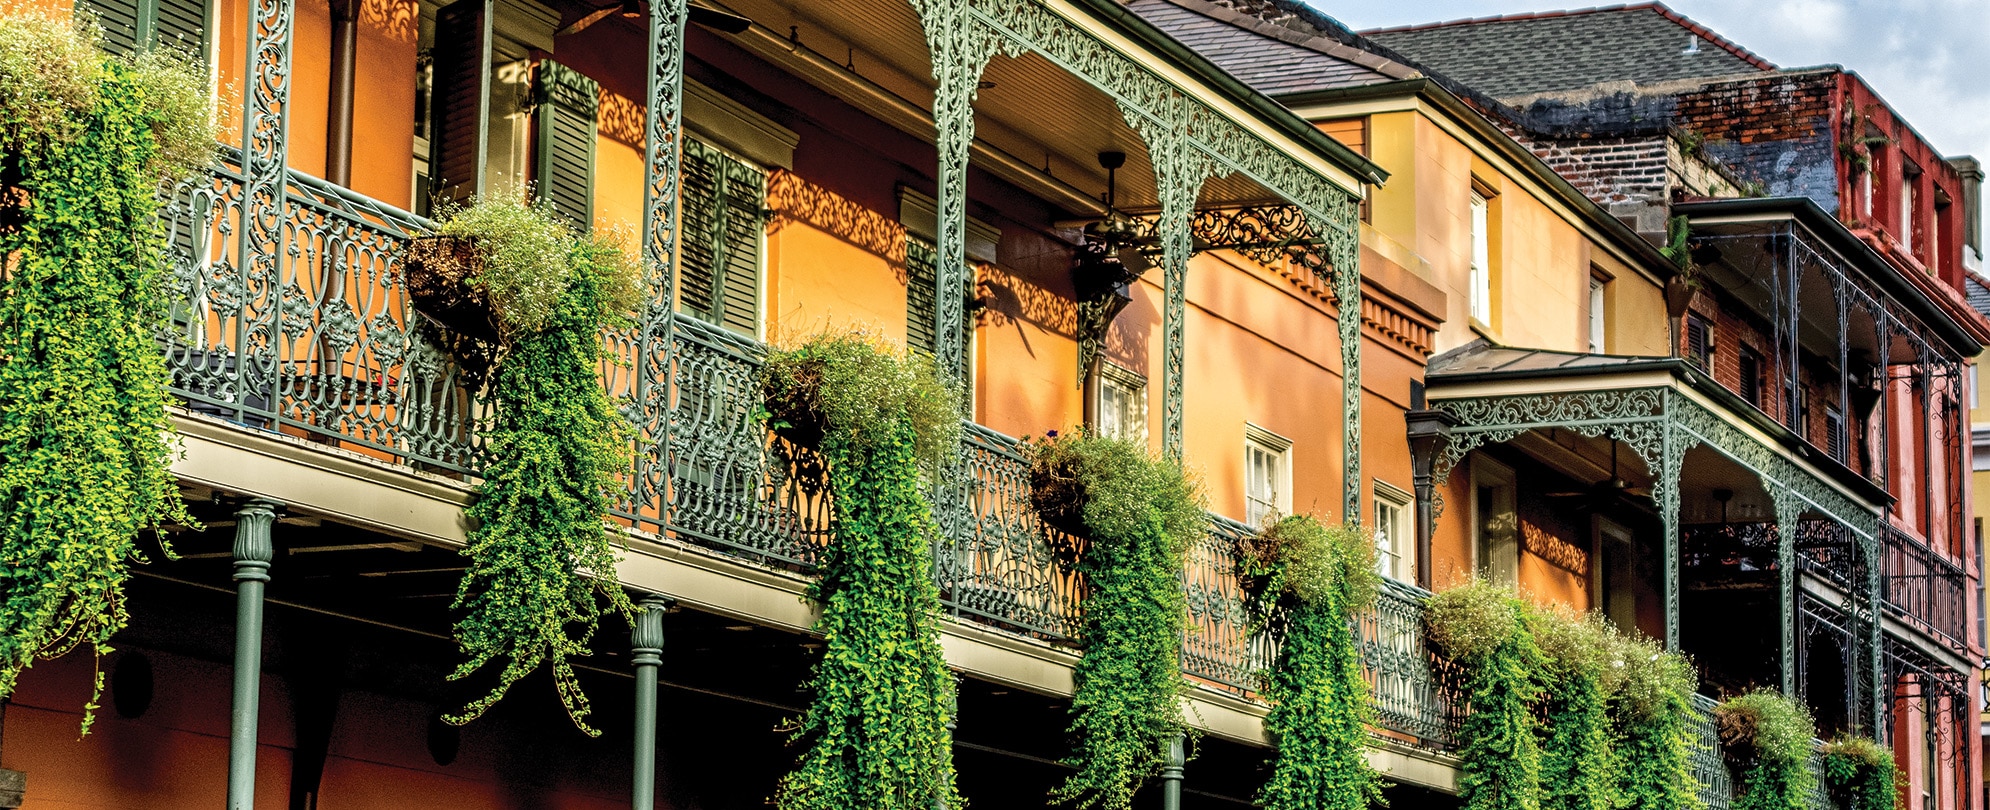 New Orleans French Quarter balconies with plants . 